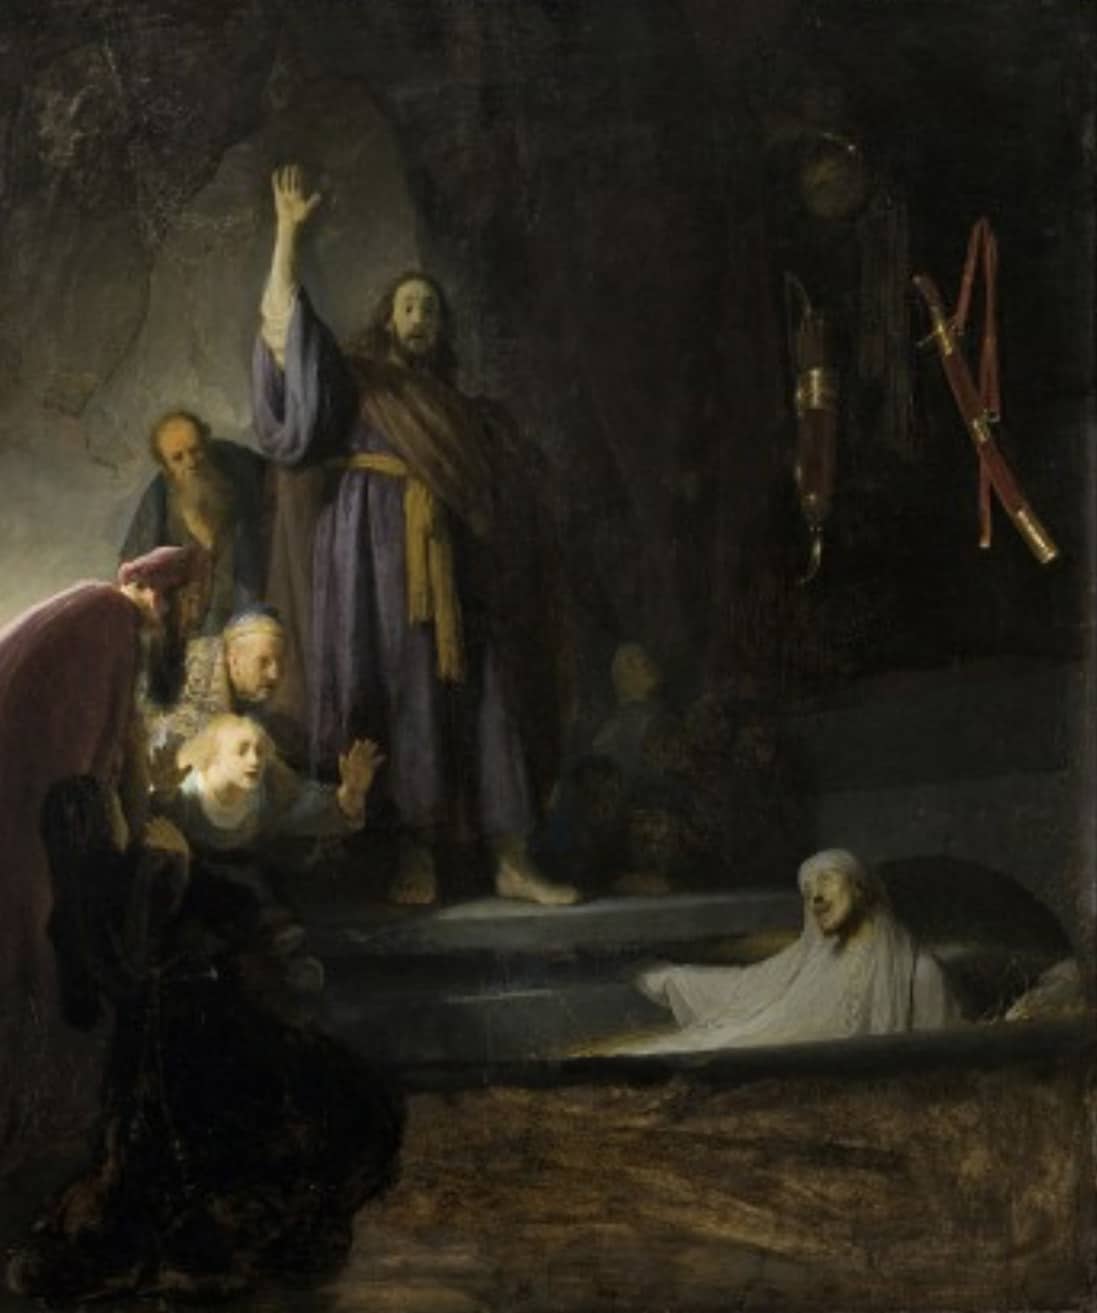 The Raising of Lazarus by Rembrandt